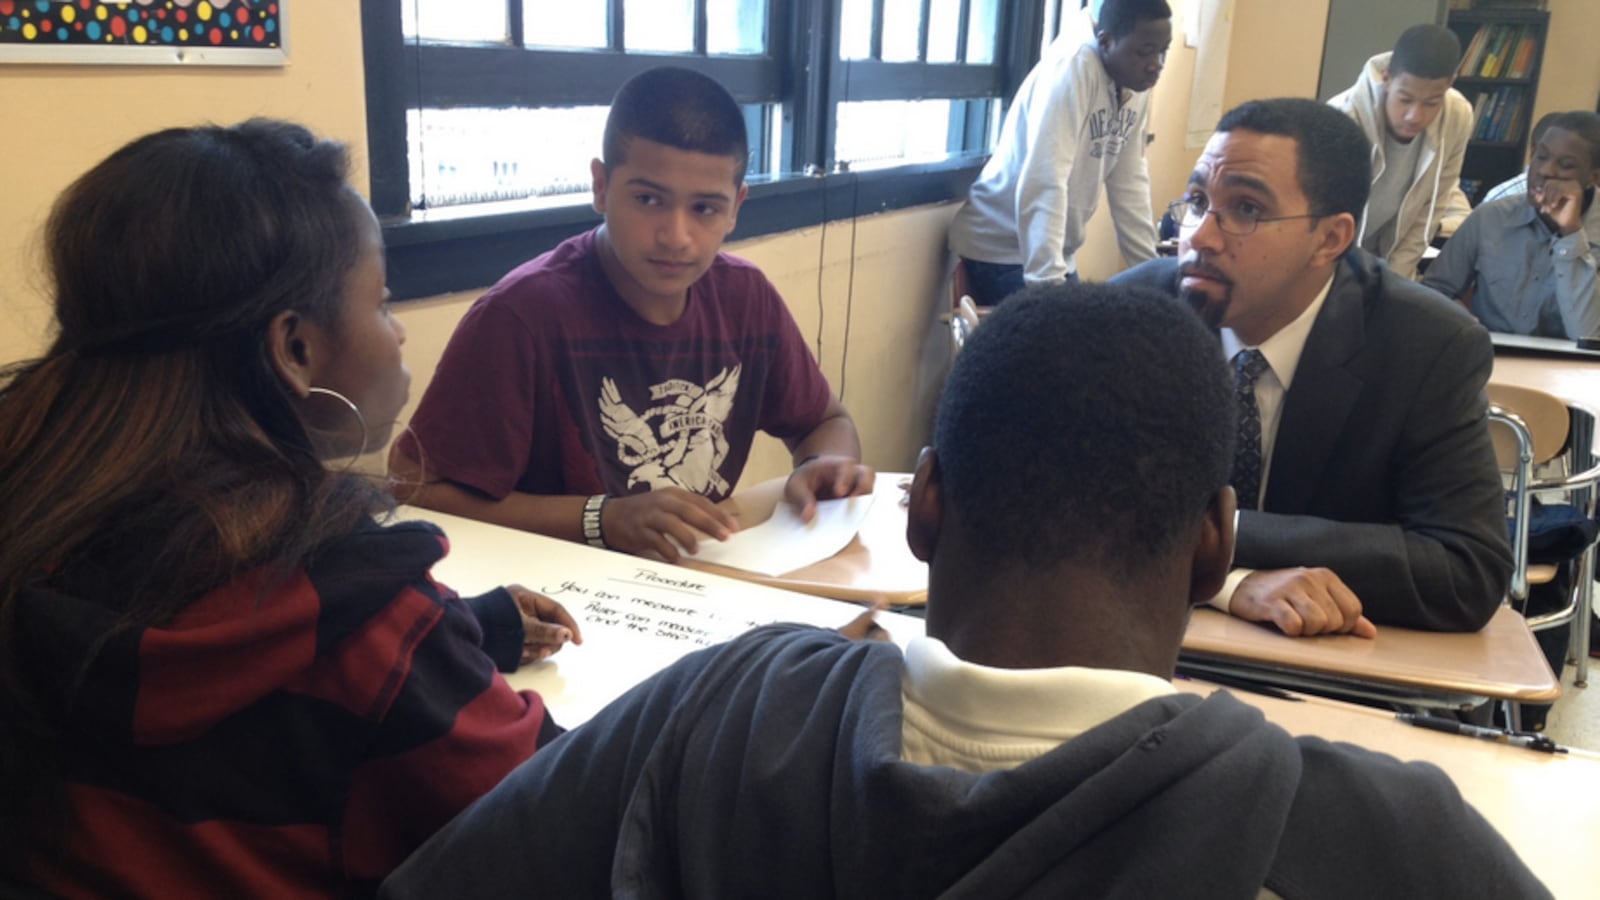 John King, visiting Brooklyn's Pathways in Technology Early College High School in 2012.